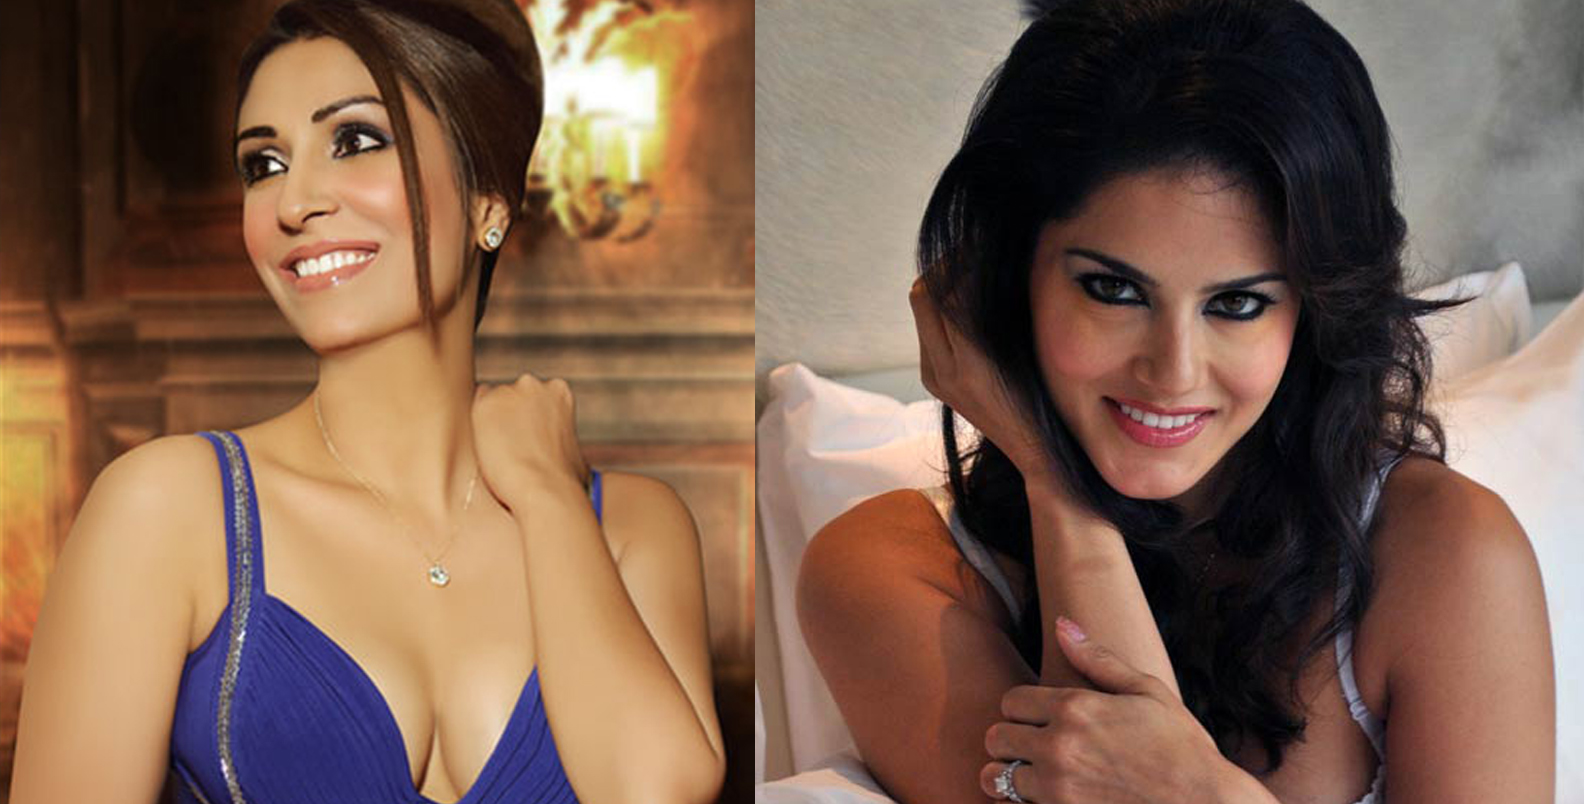 100 Cr Defamation Case Against Sunny Leone! | JFW Just for women